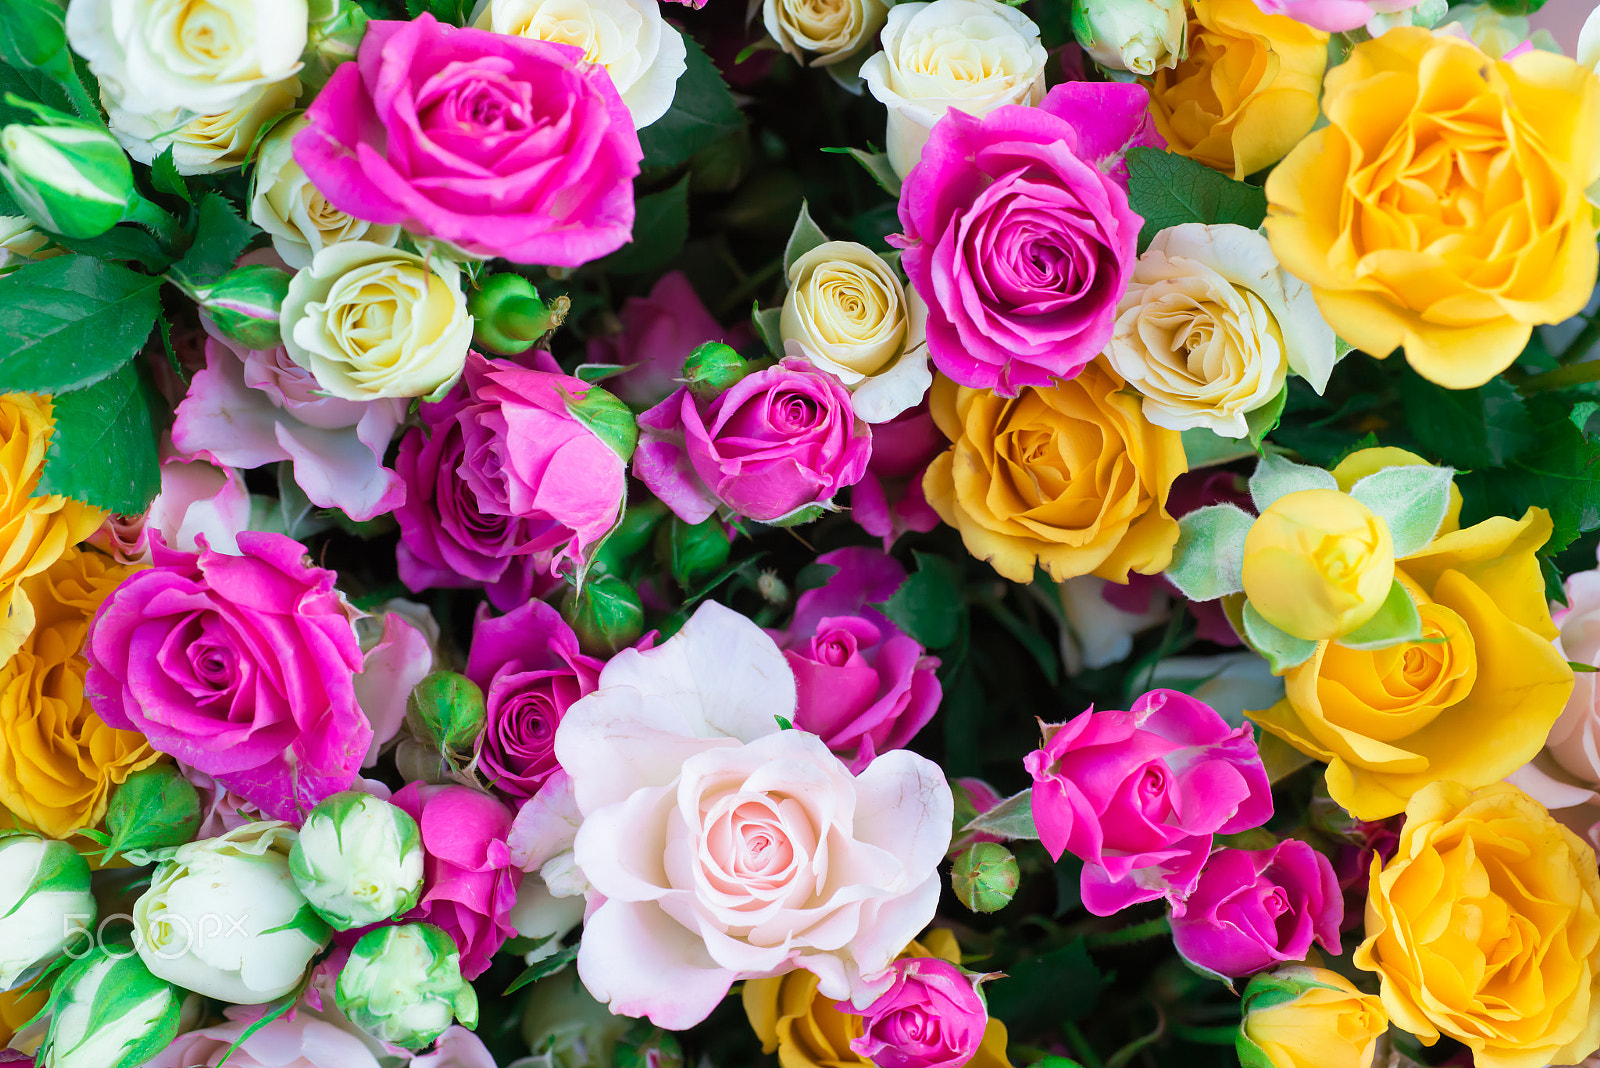 Nikon D800 sample photo. Fresh colorful roses with green leaves photography